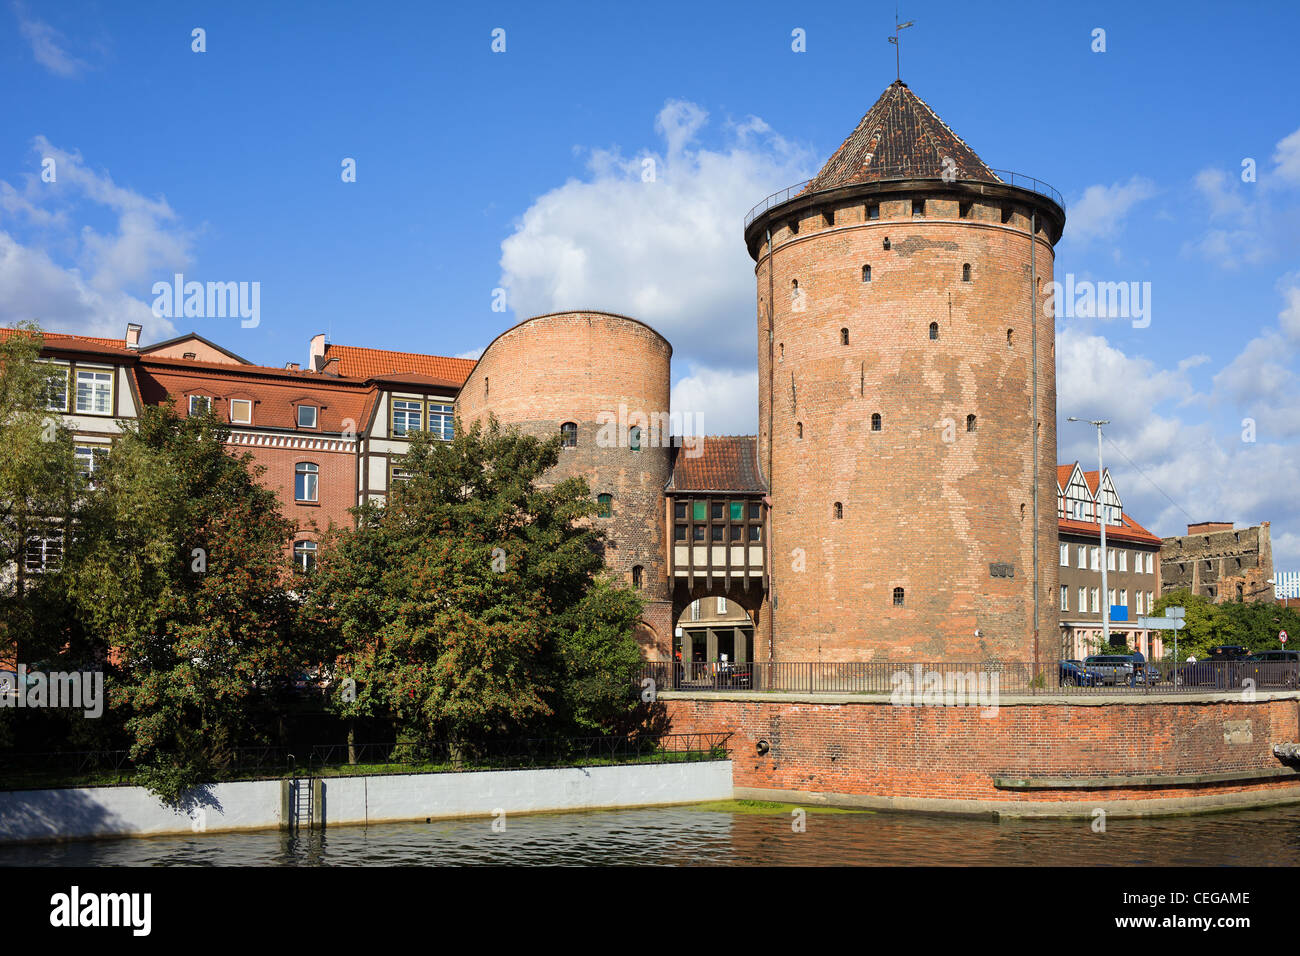 Stagiewna Gate (Polish: Stagwie Mleczne) on the Granary Island, Gothic style defensive tower in city of Gdansk, Poland. Stock Photo